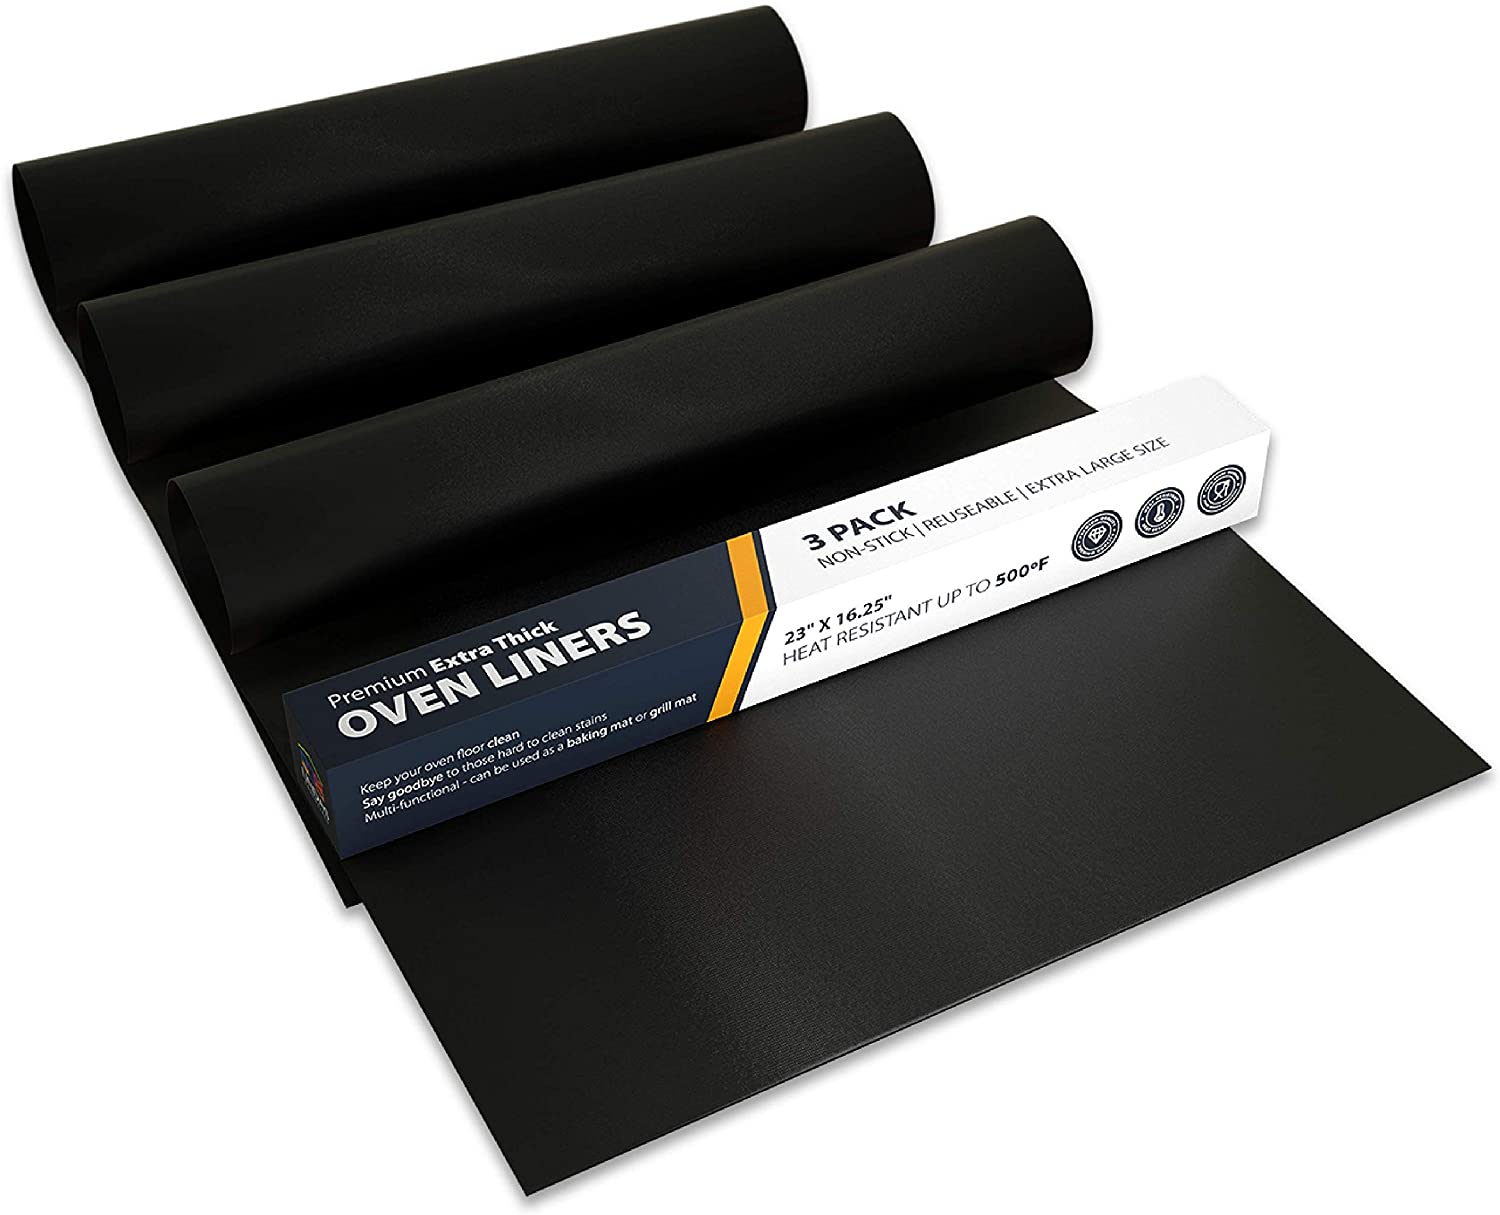 Oven Liners for Bottom of Oven with Baking Sheet Liner | Heat Resistant  Oven Liners for Bottom of Electric Oven and Teflon Sheets for Baking 